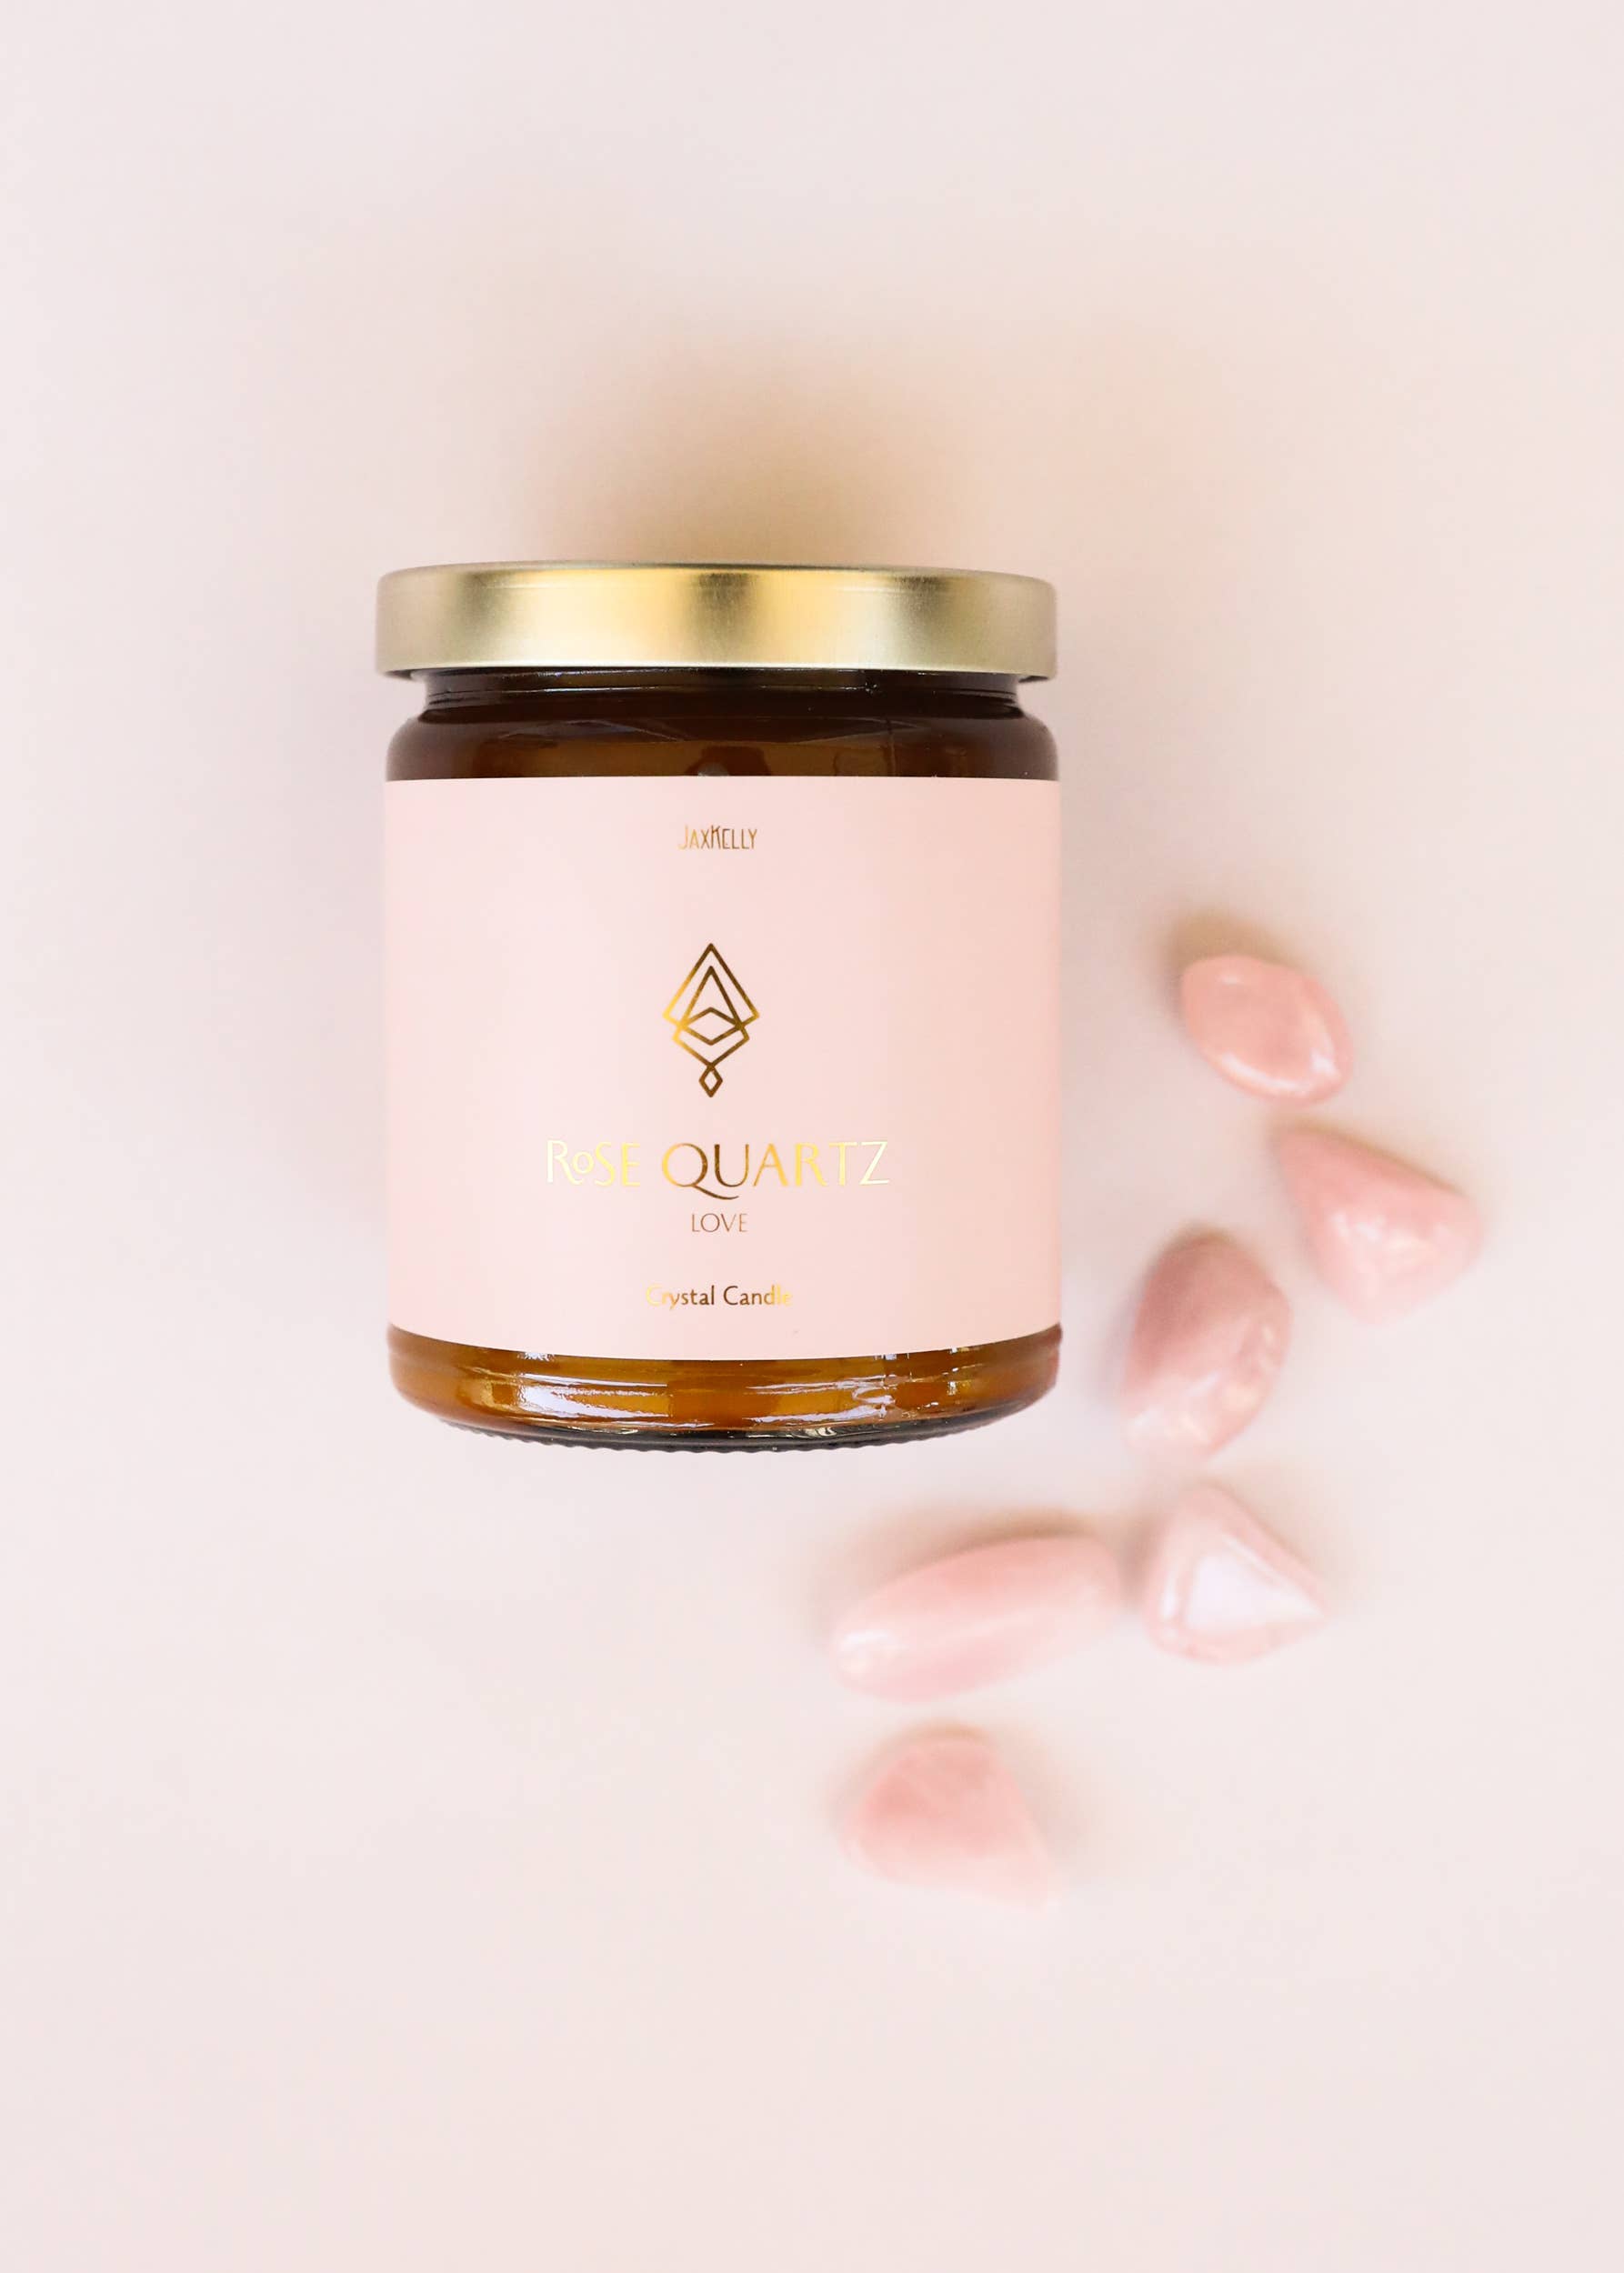 Rose Quartz Amber Crystal Candle by JaxKelly